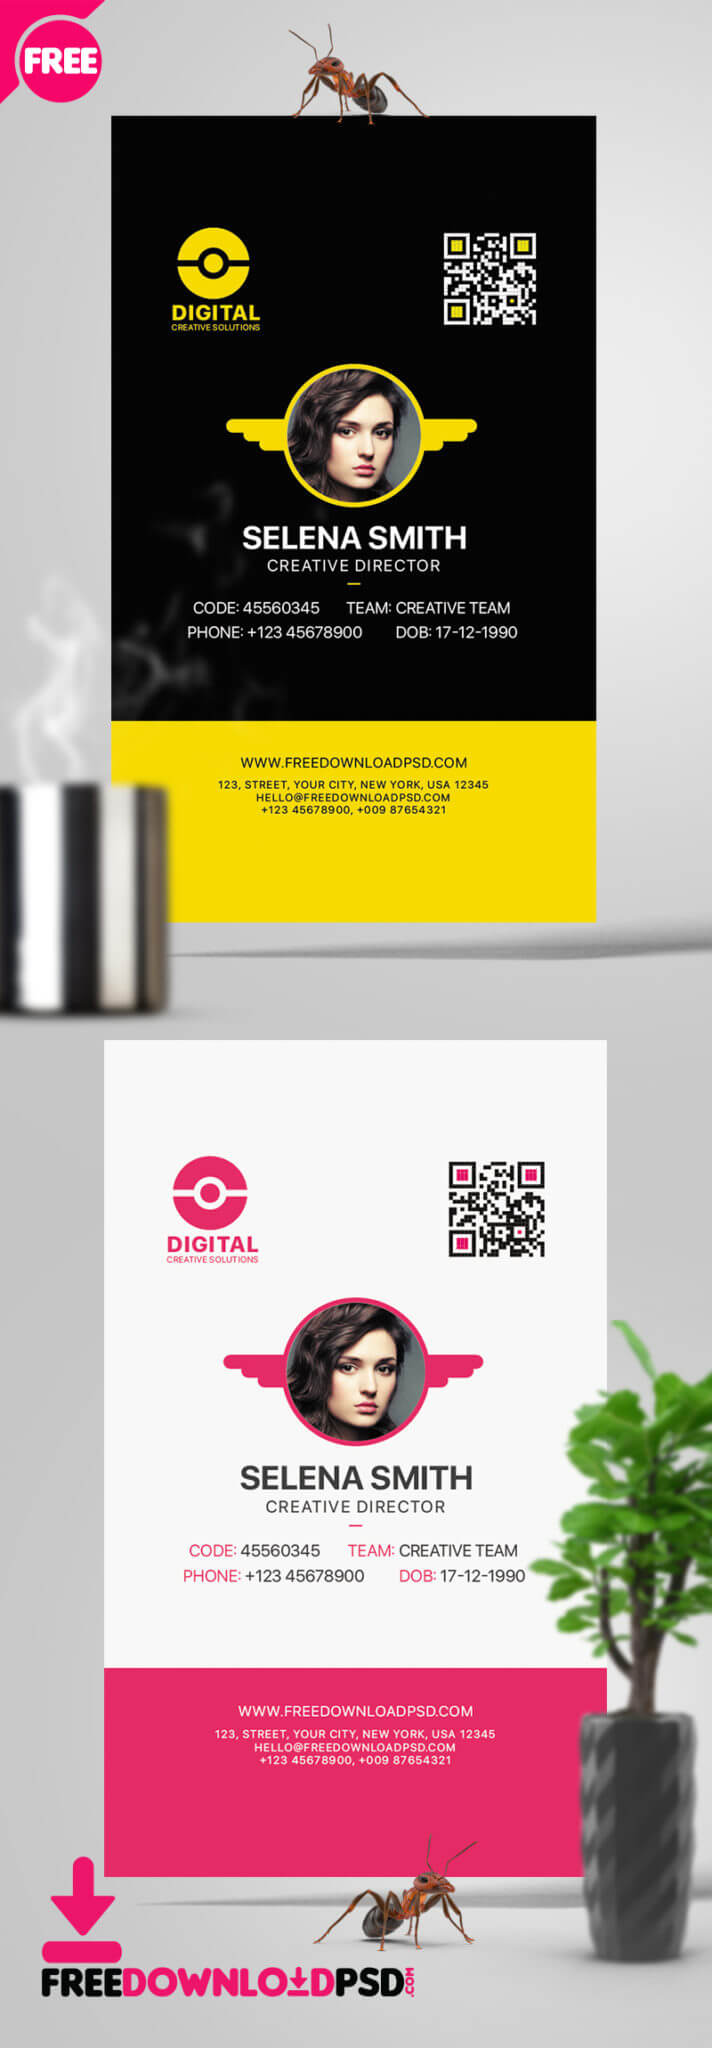 College Id Card Template Psd Free Download Regarding College Id Card Template Psd